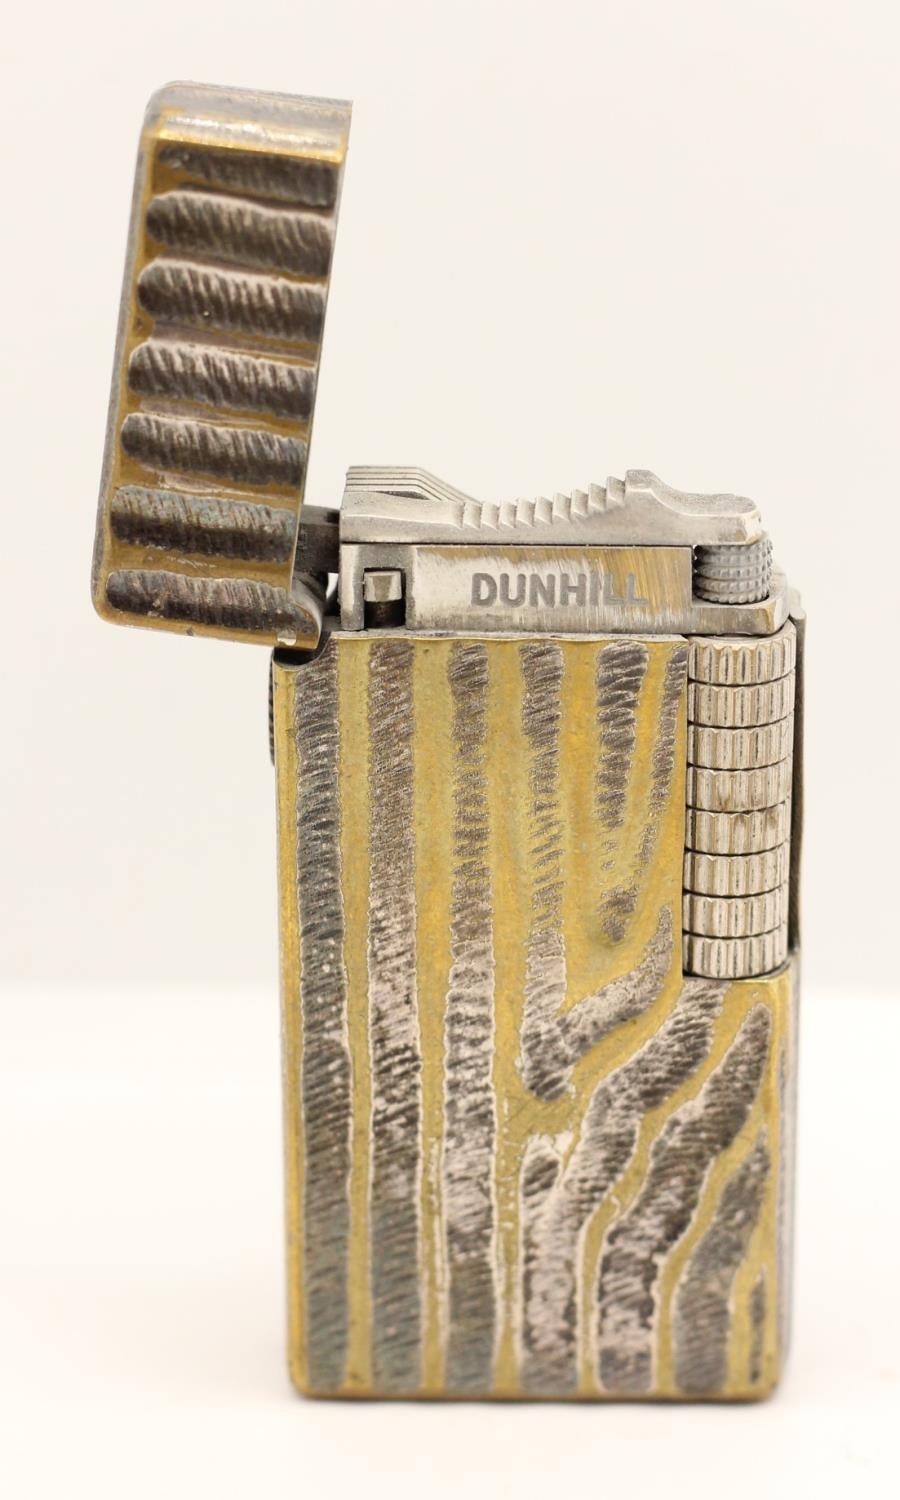 A Dunhill 70 rollagas lighter, c.1970's, with textured body, booklet, pouch and box - Image 2 of 3